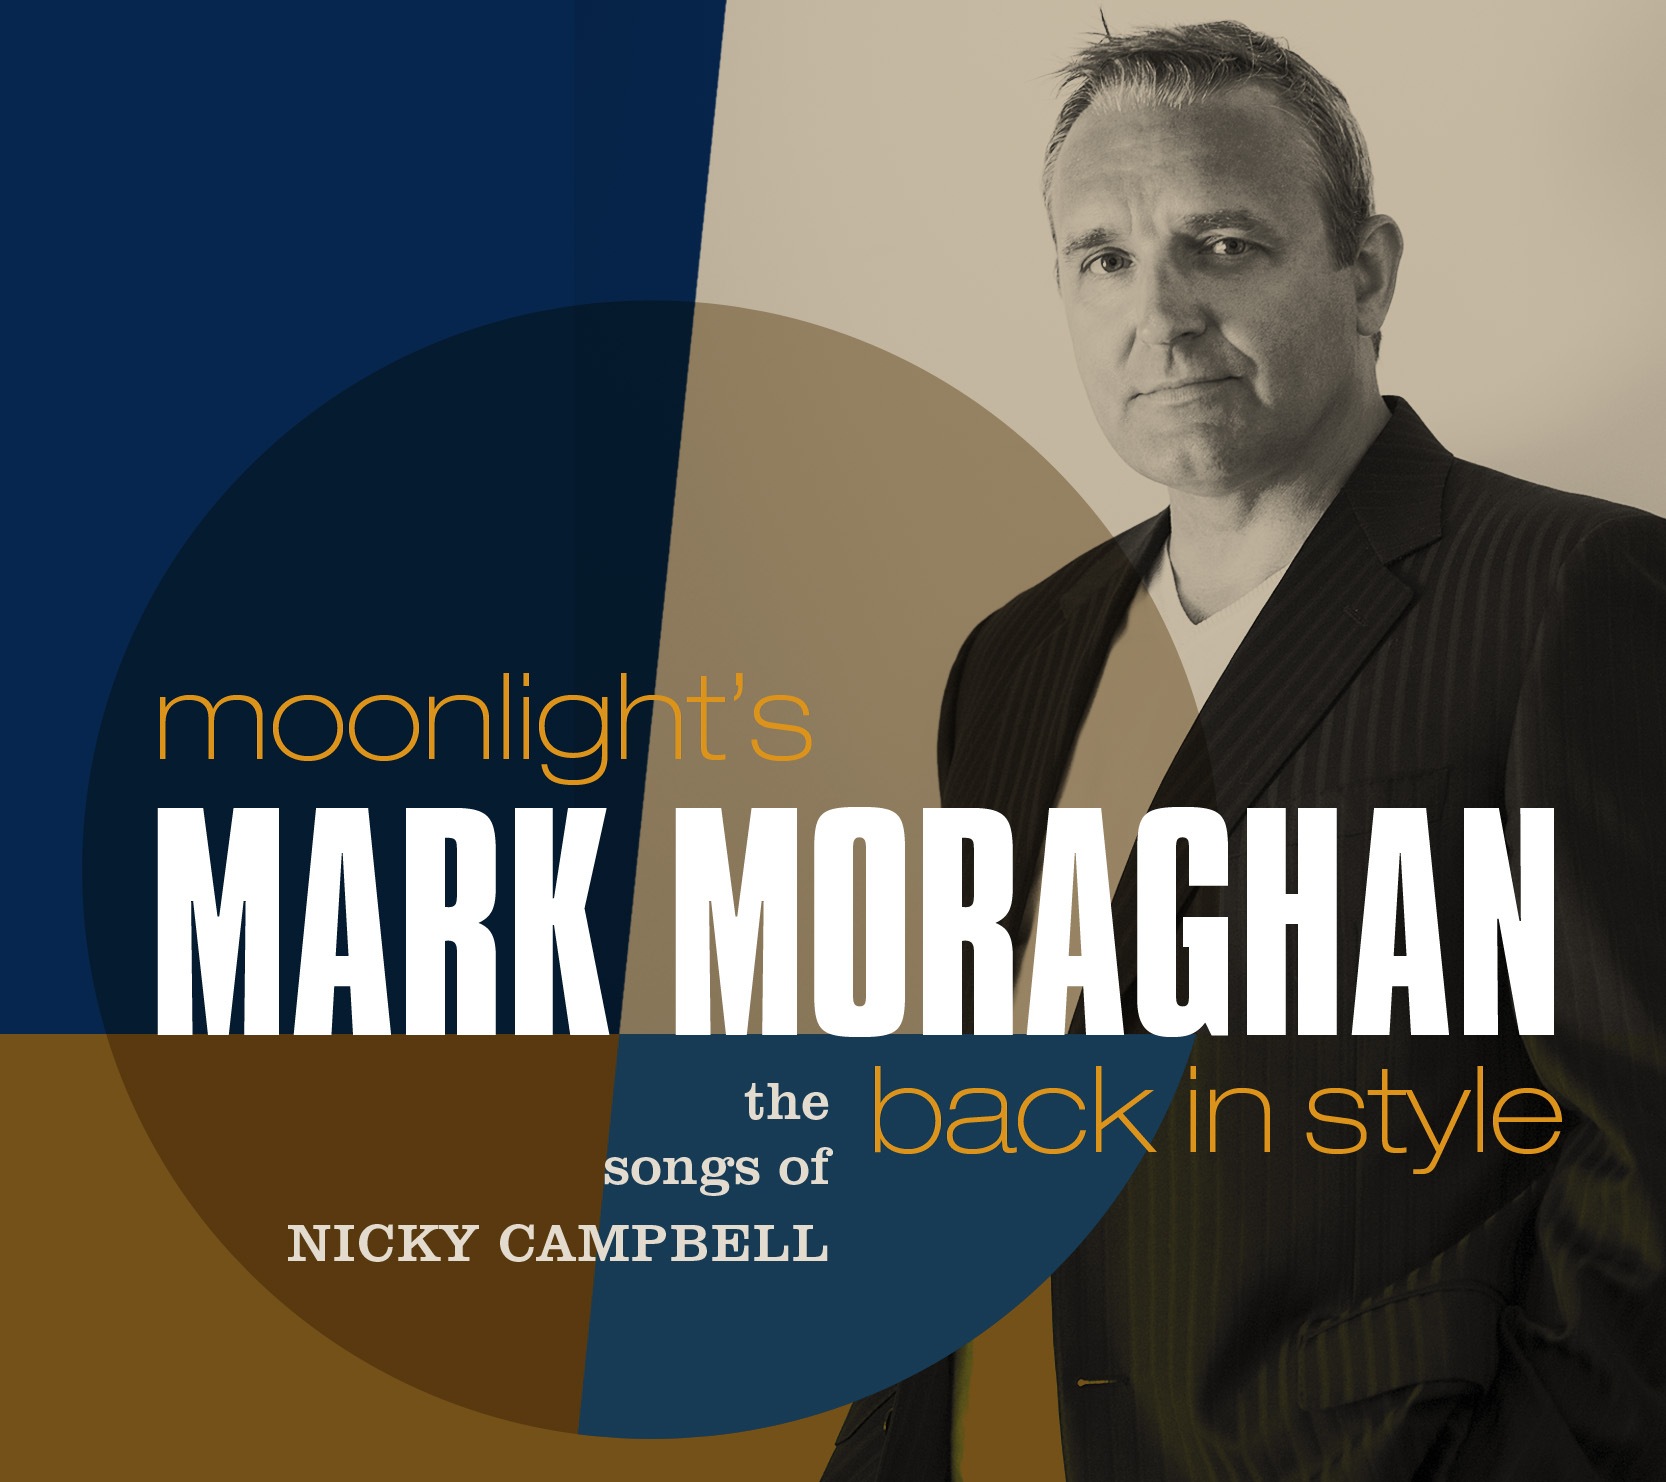 Moonlights Back In Style out now on Linn Records